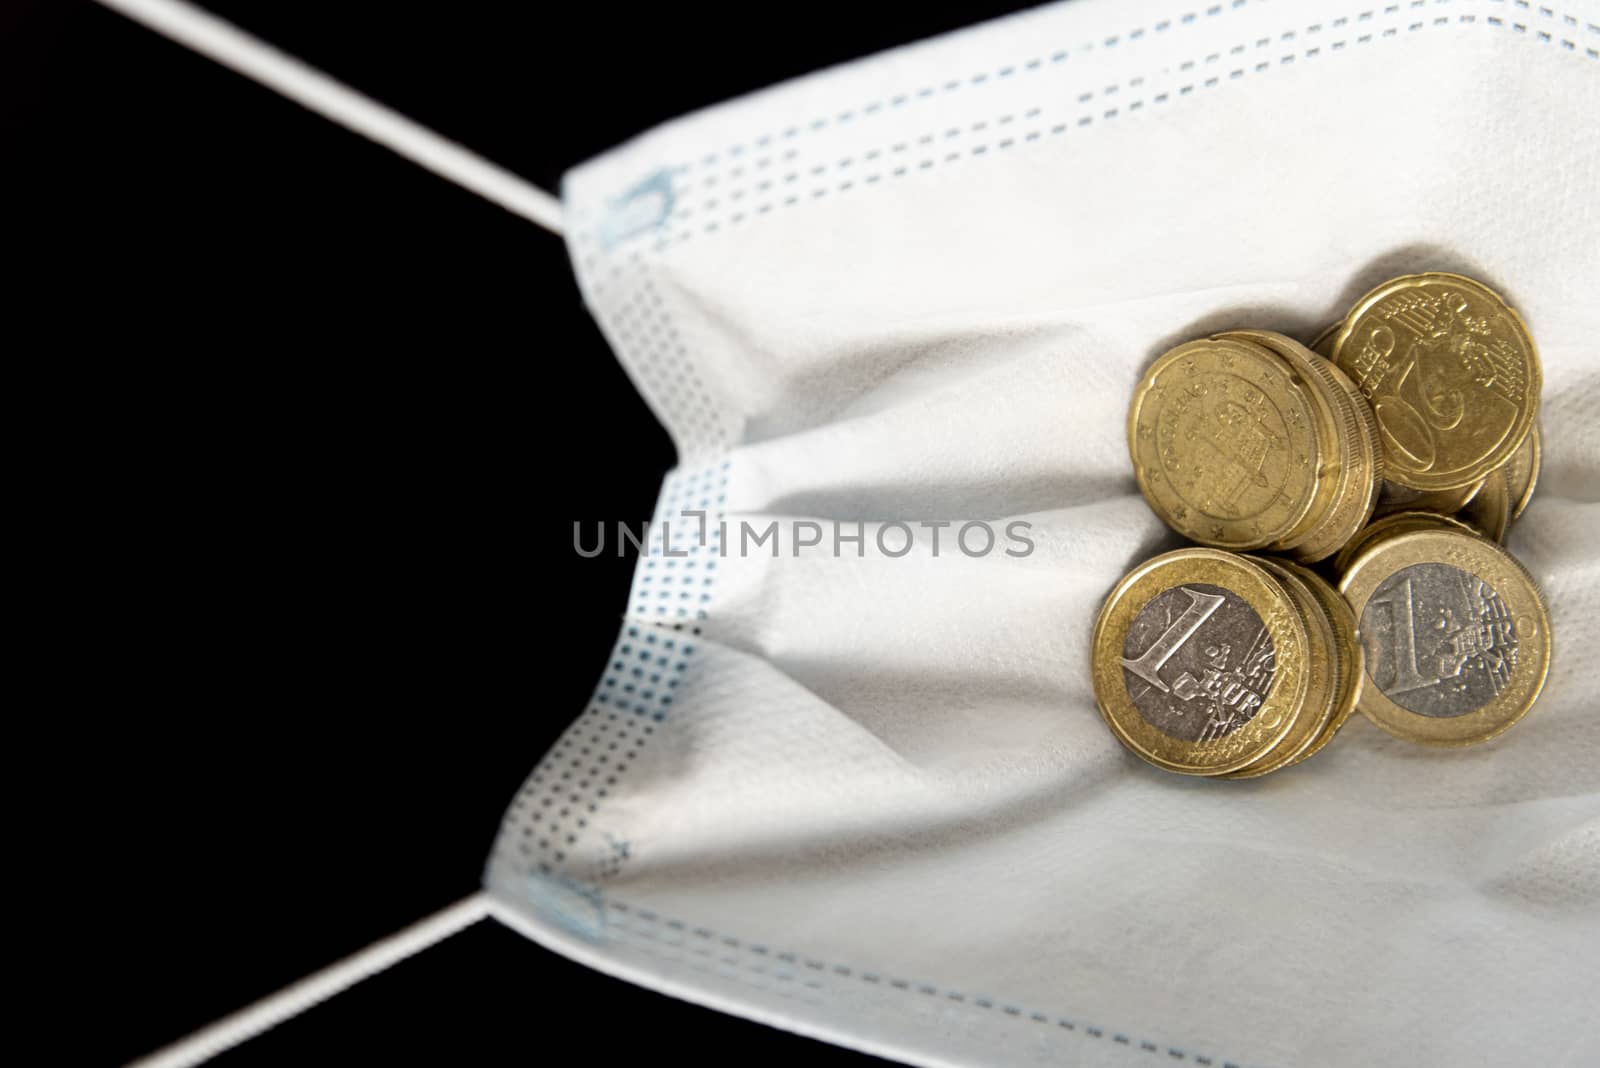 Medical face mask with money, black background. World coronavirus economic losses concept. Concept of financial impact of covid-19 on European money area. Euros and coins.